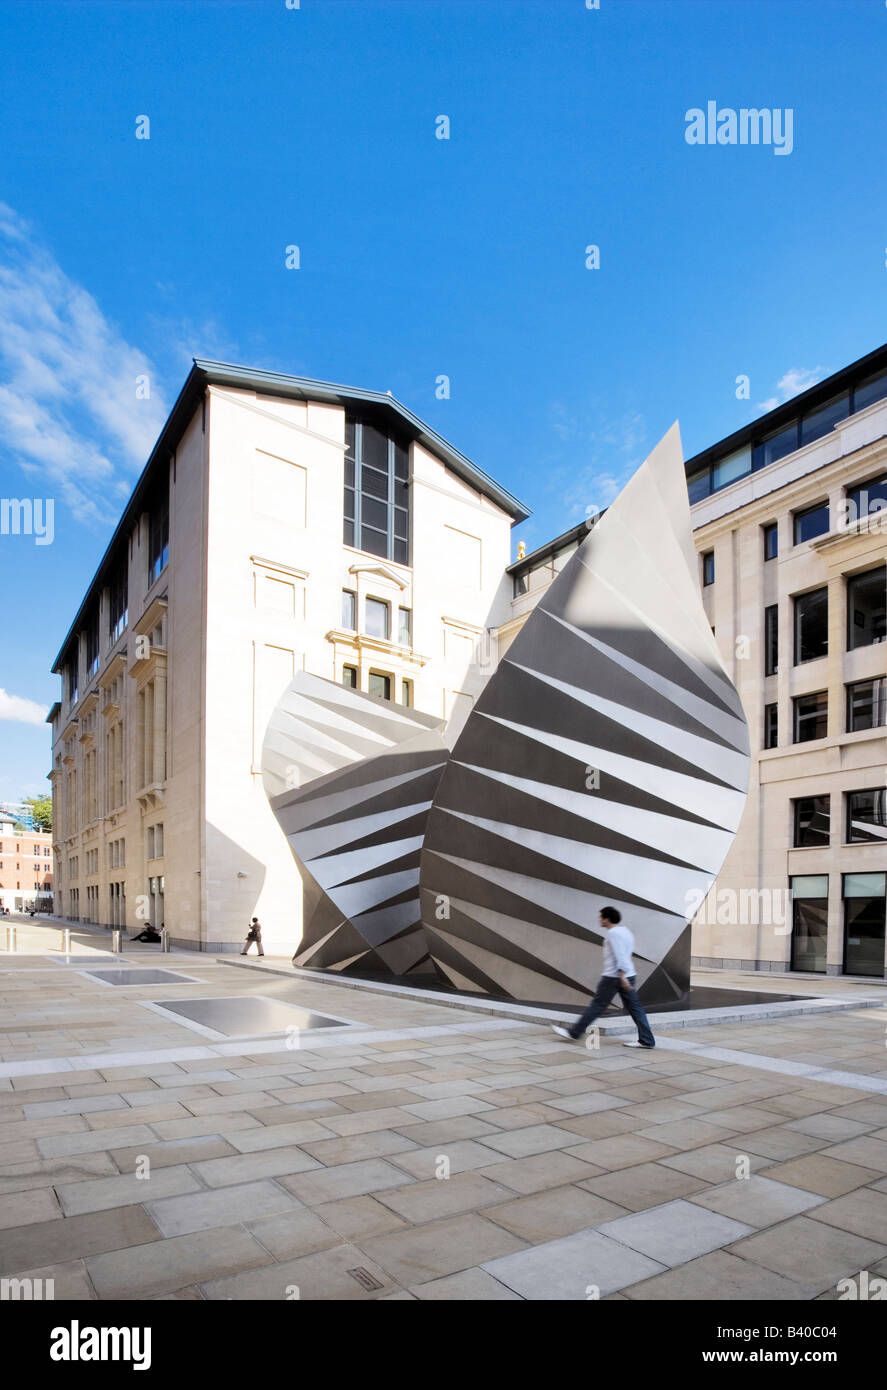 Sculpture Off Paternoster Square, London Stock Photo